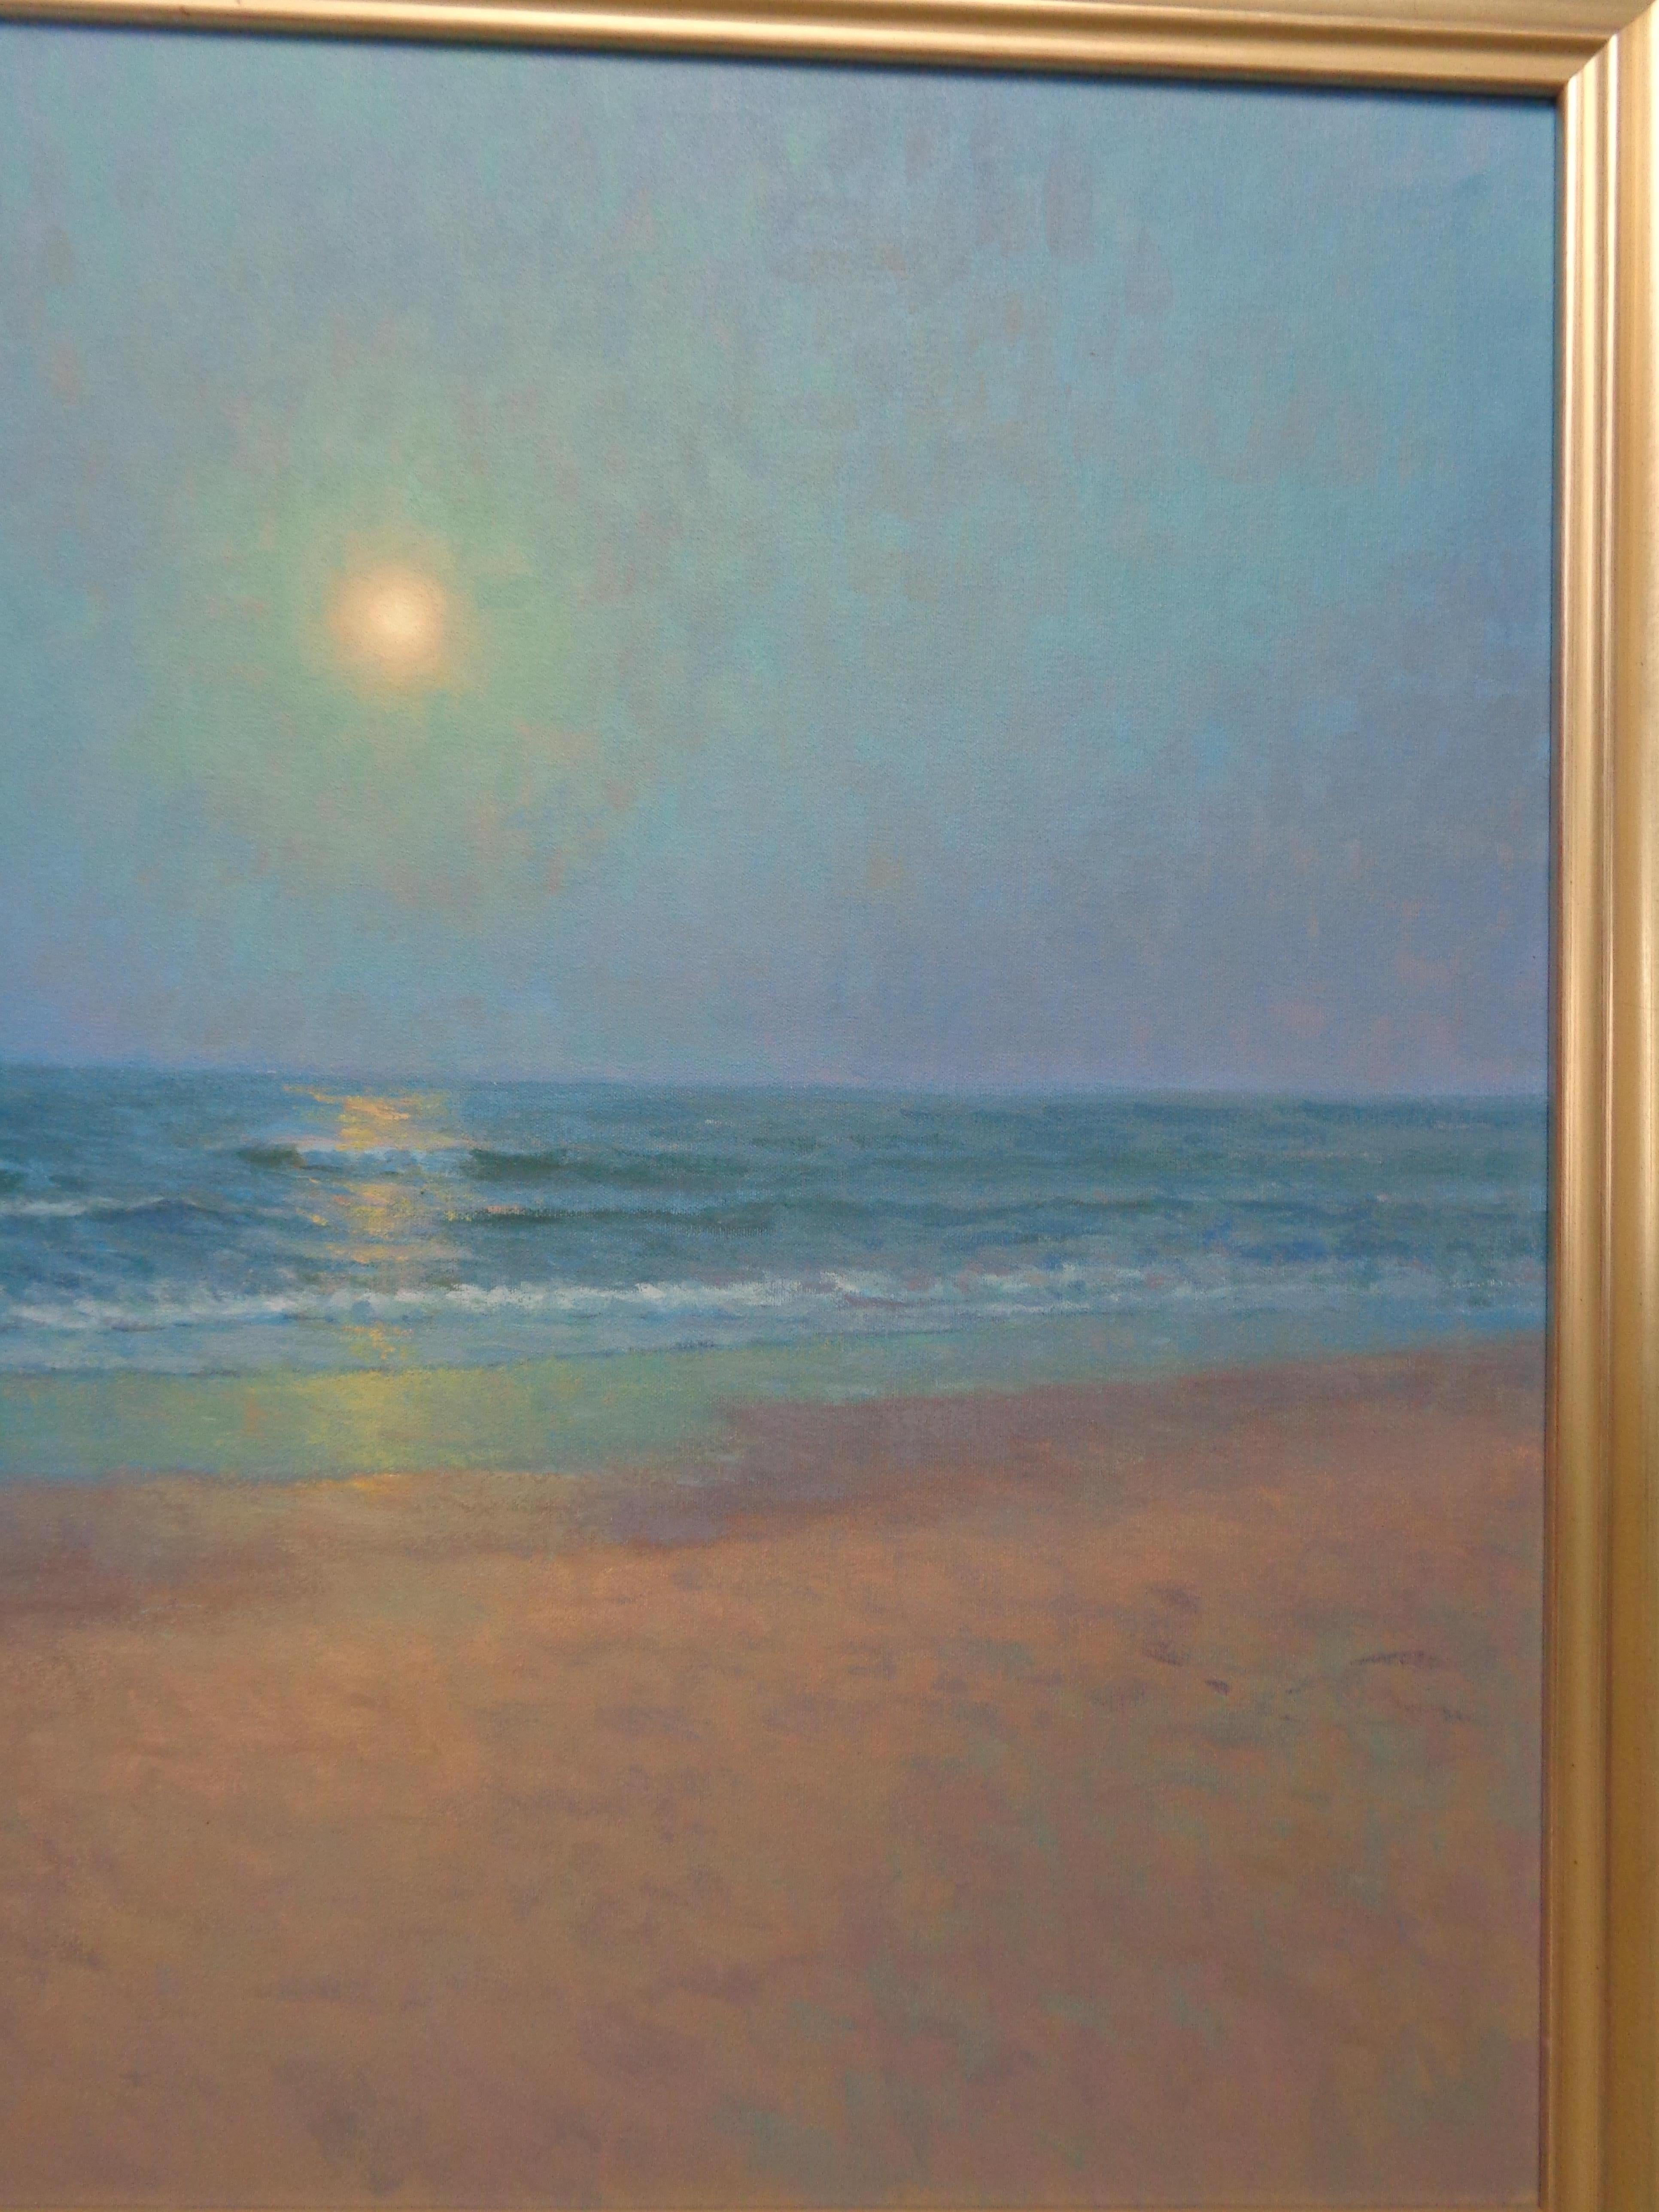 An oil painting on canvas by award winning contemporary artist Michael Budden that showcases a romantic moonlit seascape created in an impressionistic realism style with a slight touch of post impressionistic brushwork. The painting exudes the very